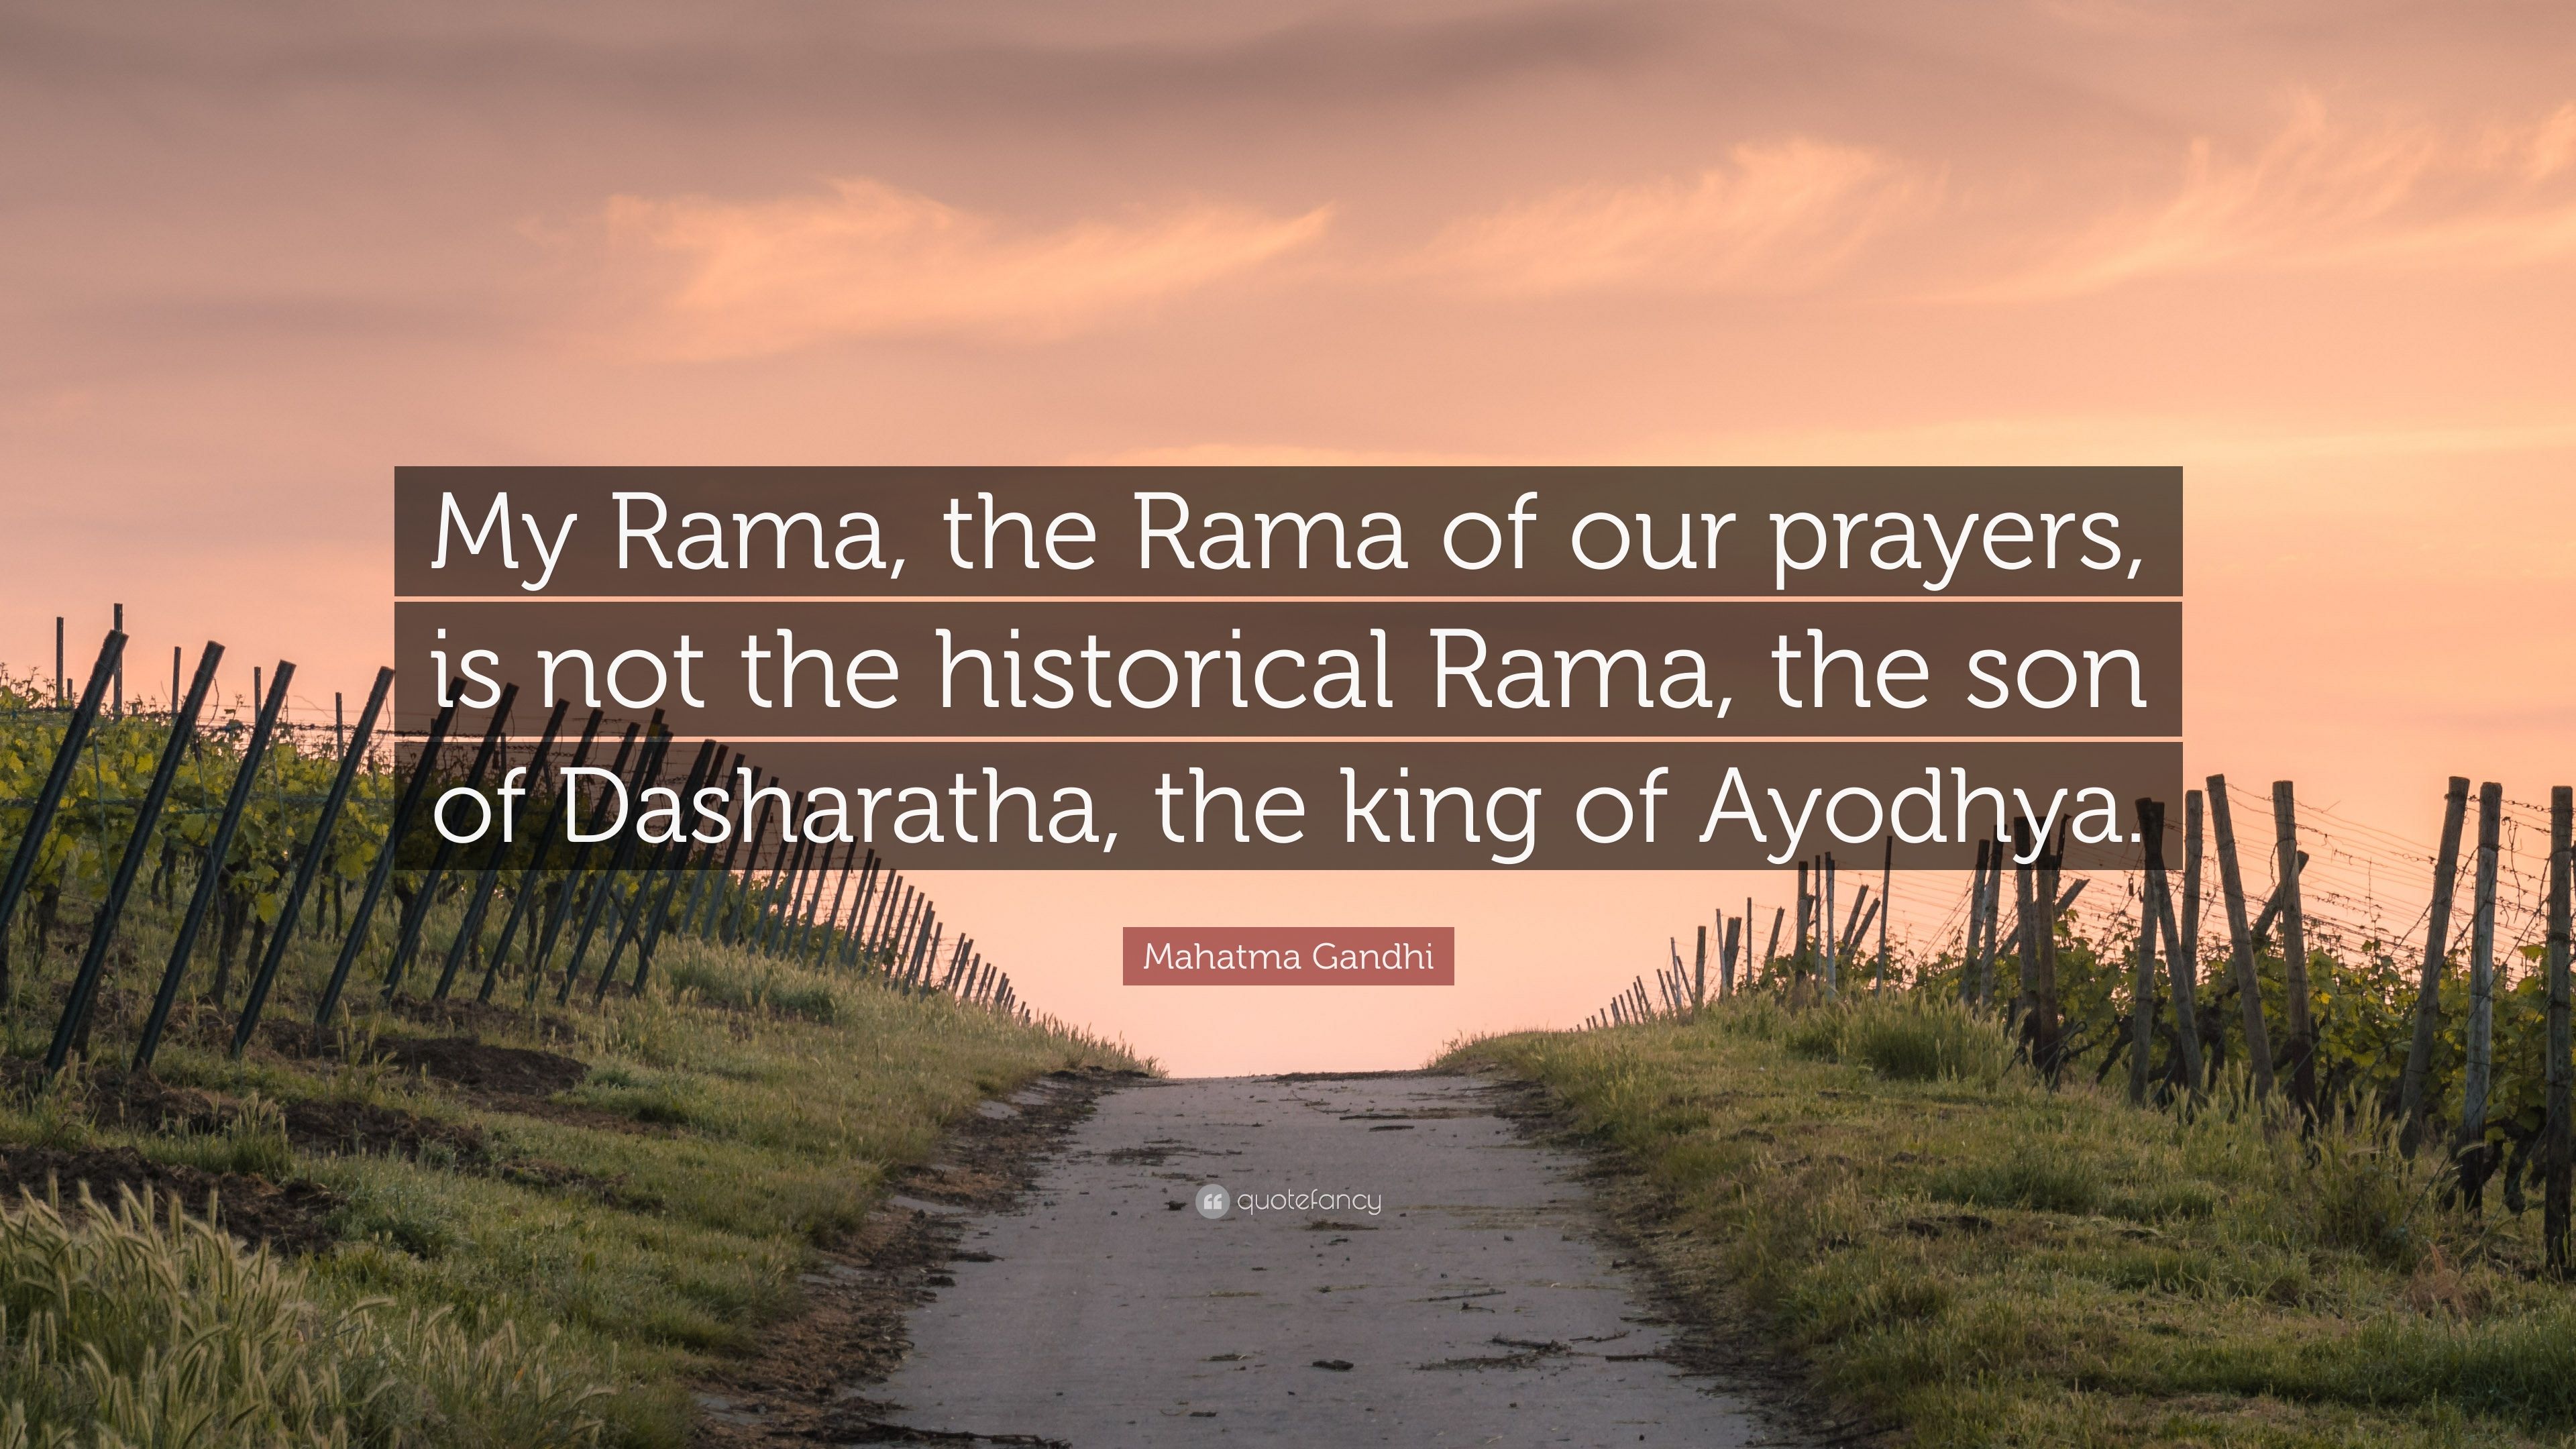 Mahatma Gandhi Quote: “My Rama, the Rama of our prayers, is not